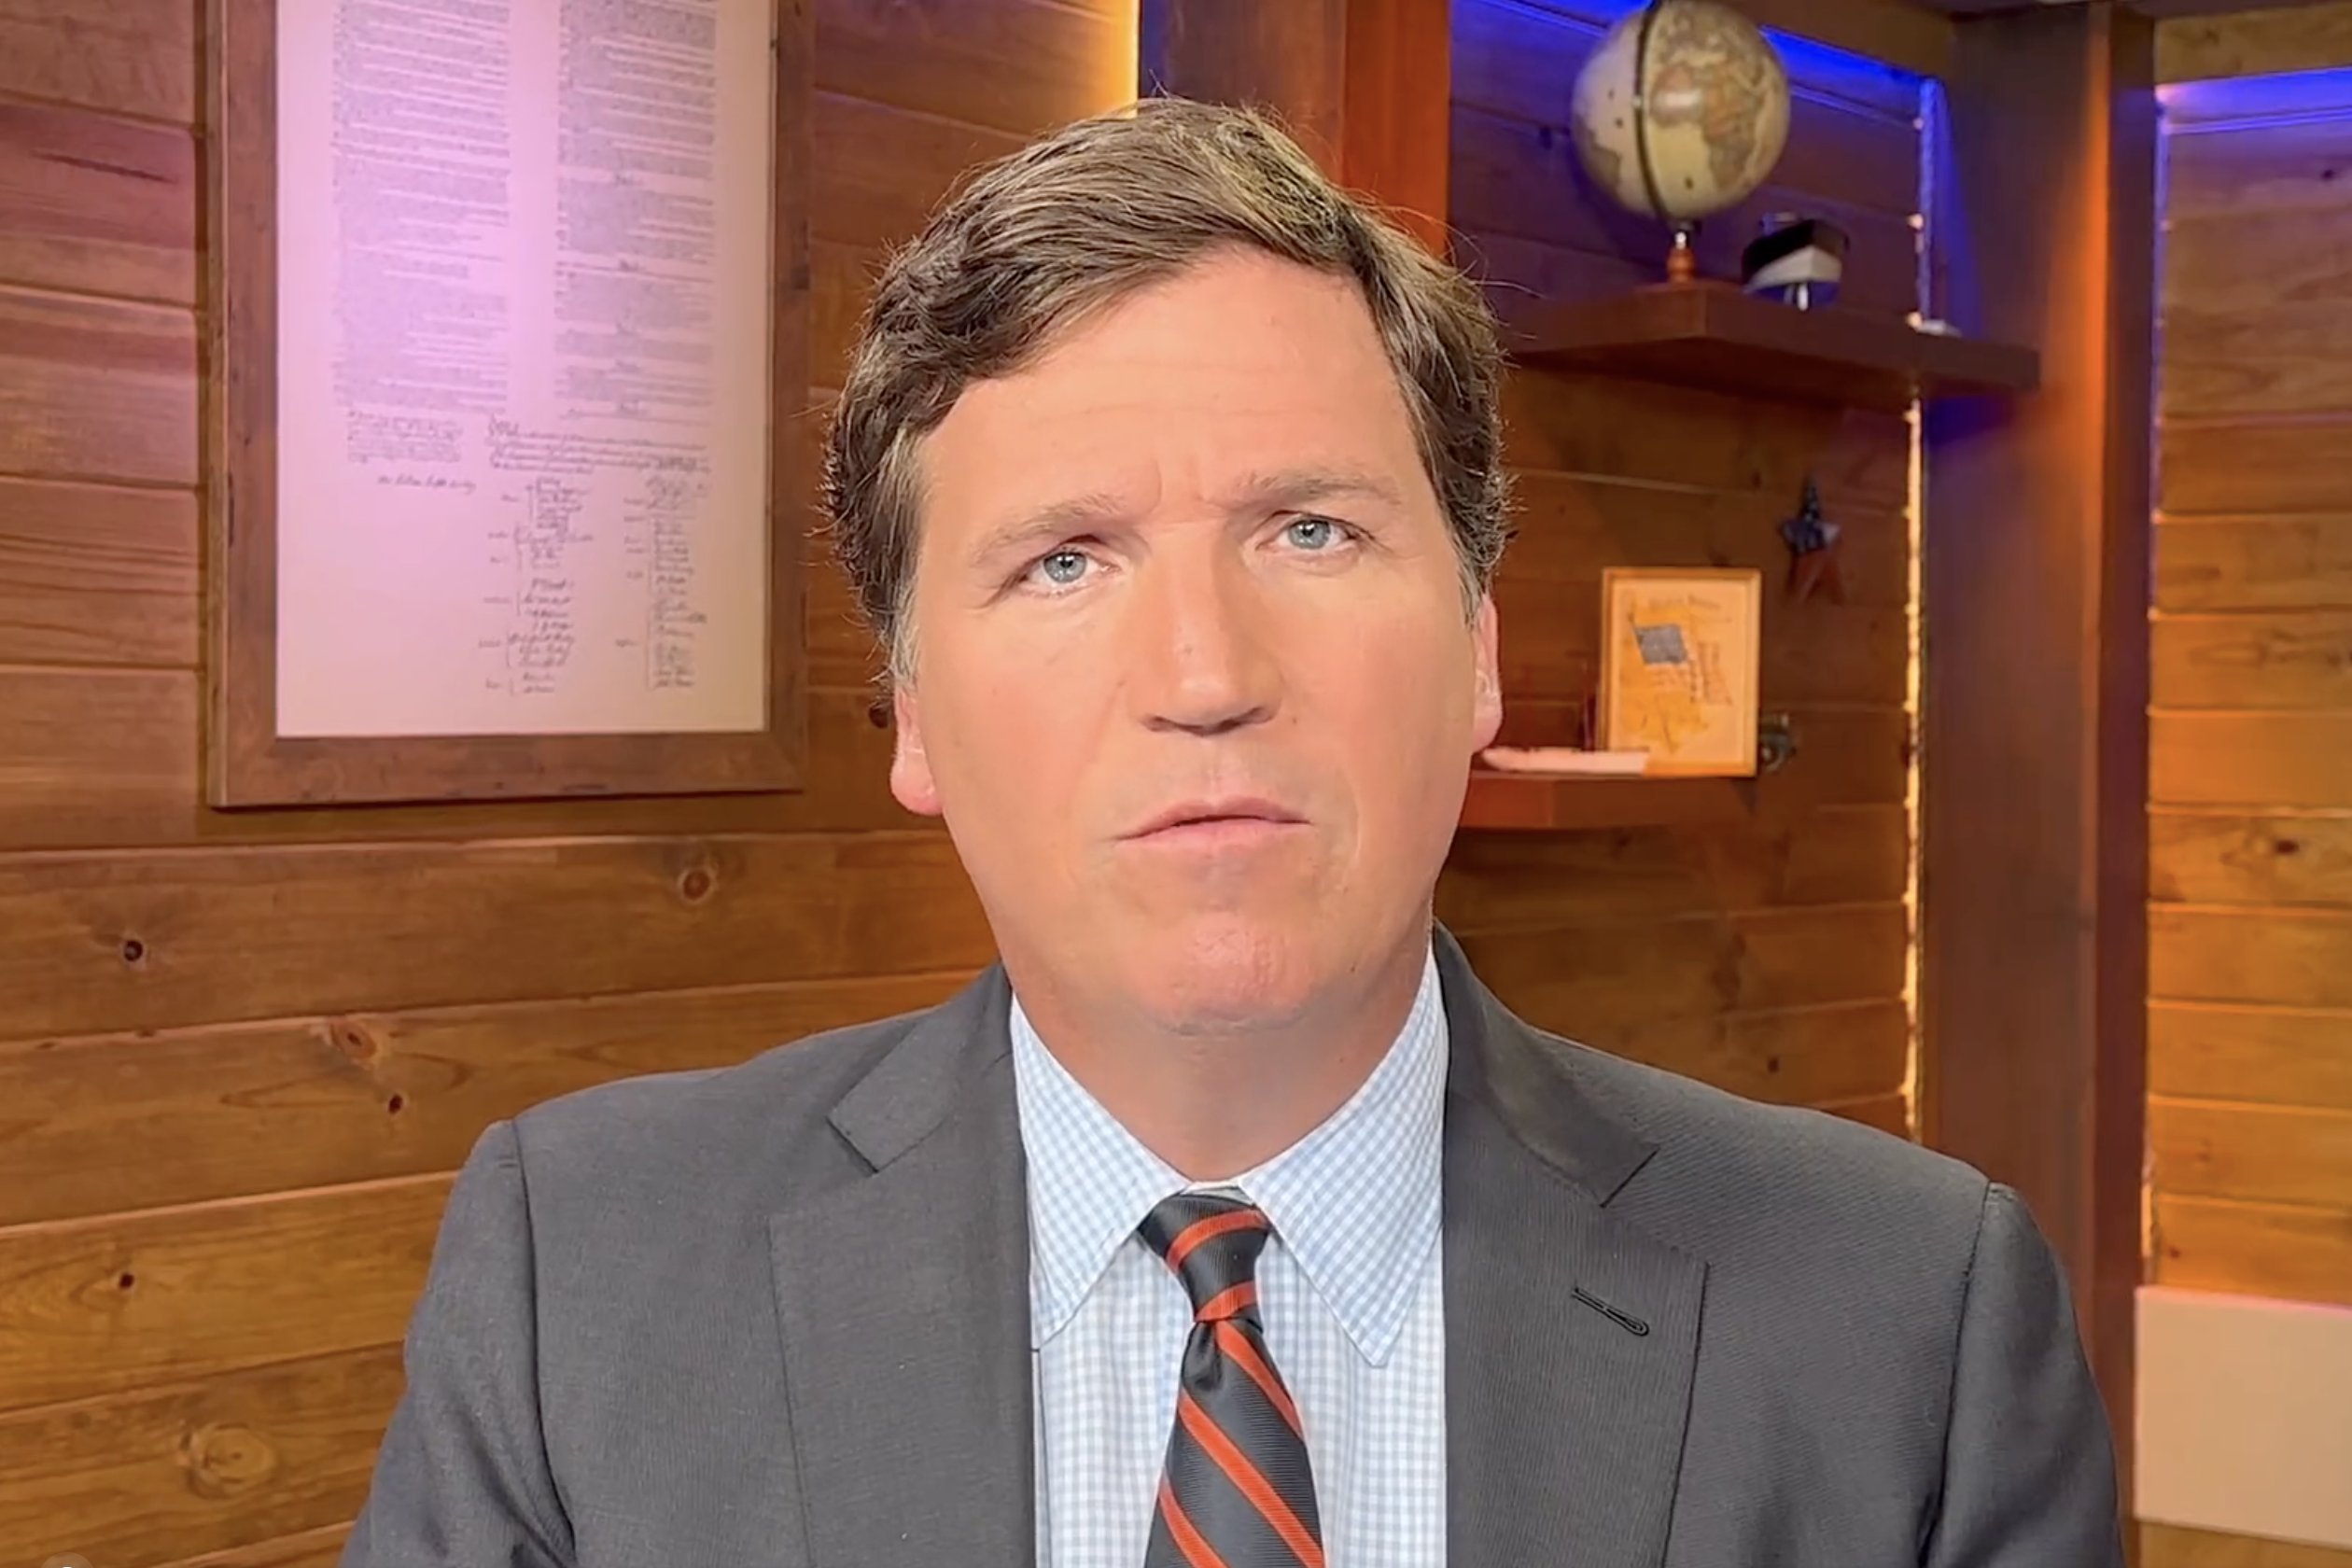 Tucker Carlson releases a video on Twitter about his Fox News departure